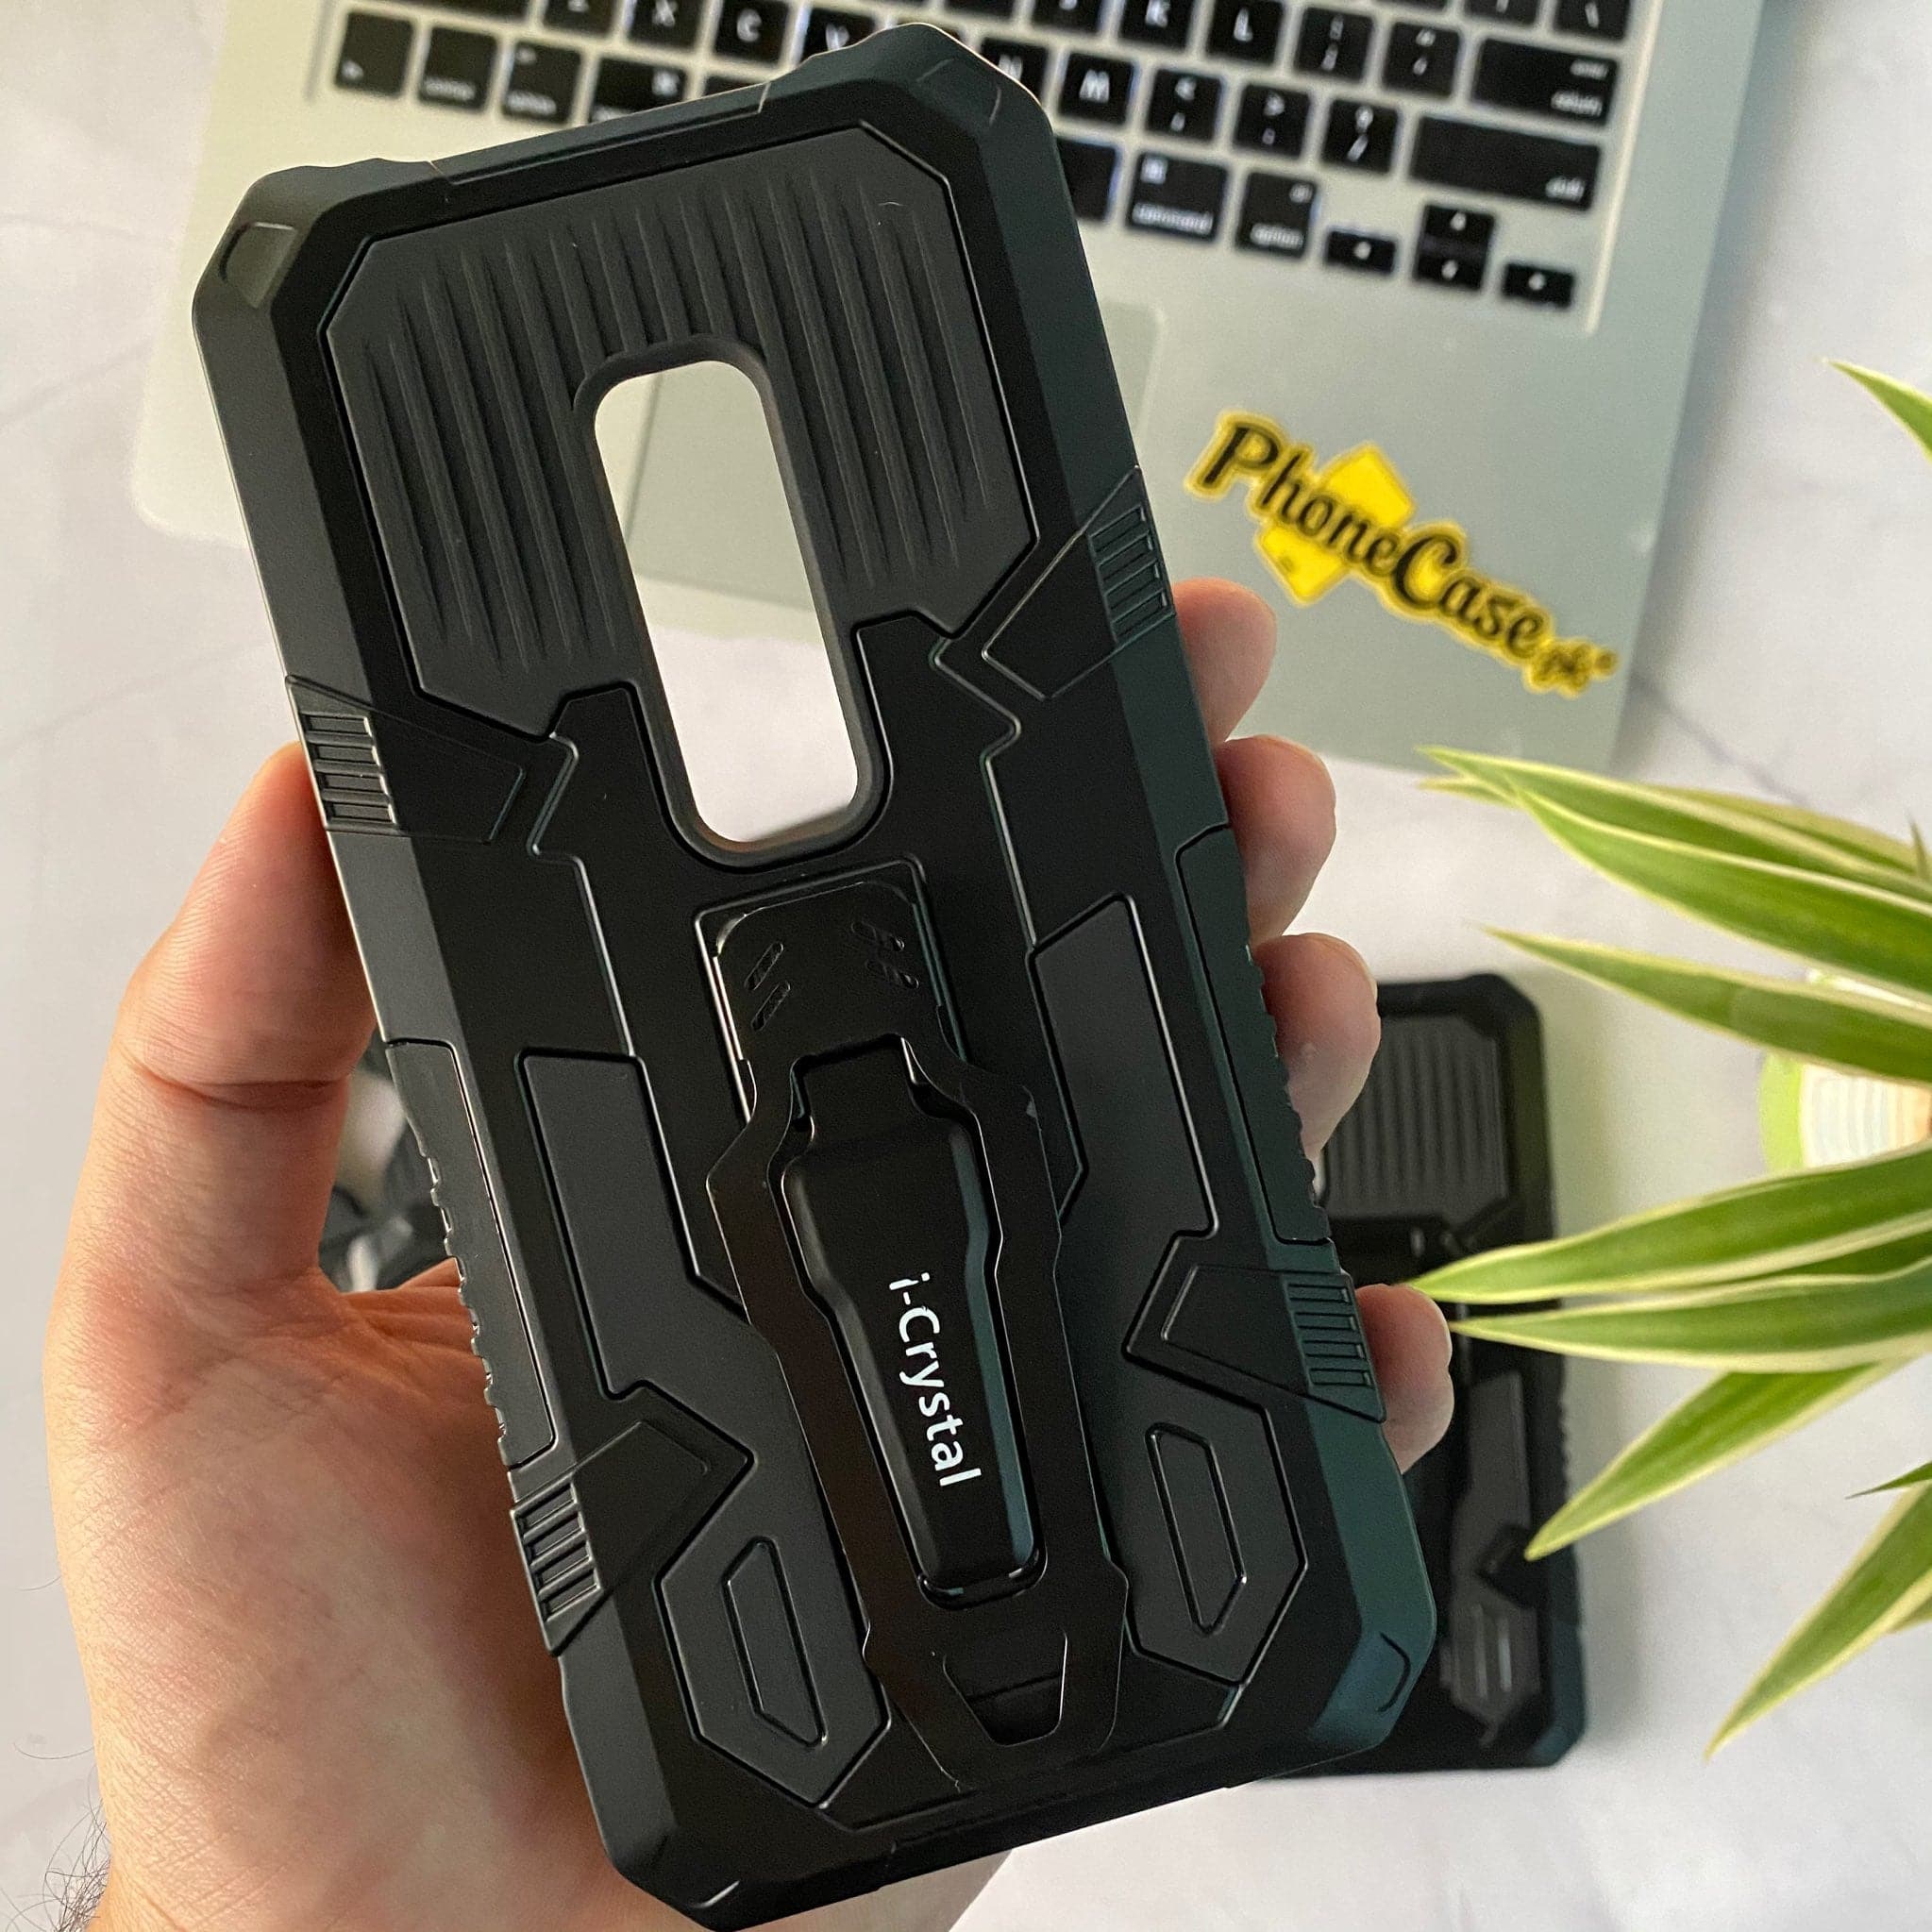 iCrystal Branded Military Army Grade Hybrid shock Proof Case For All Vivo Models